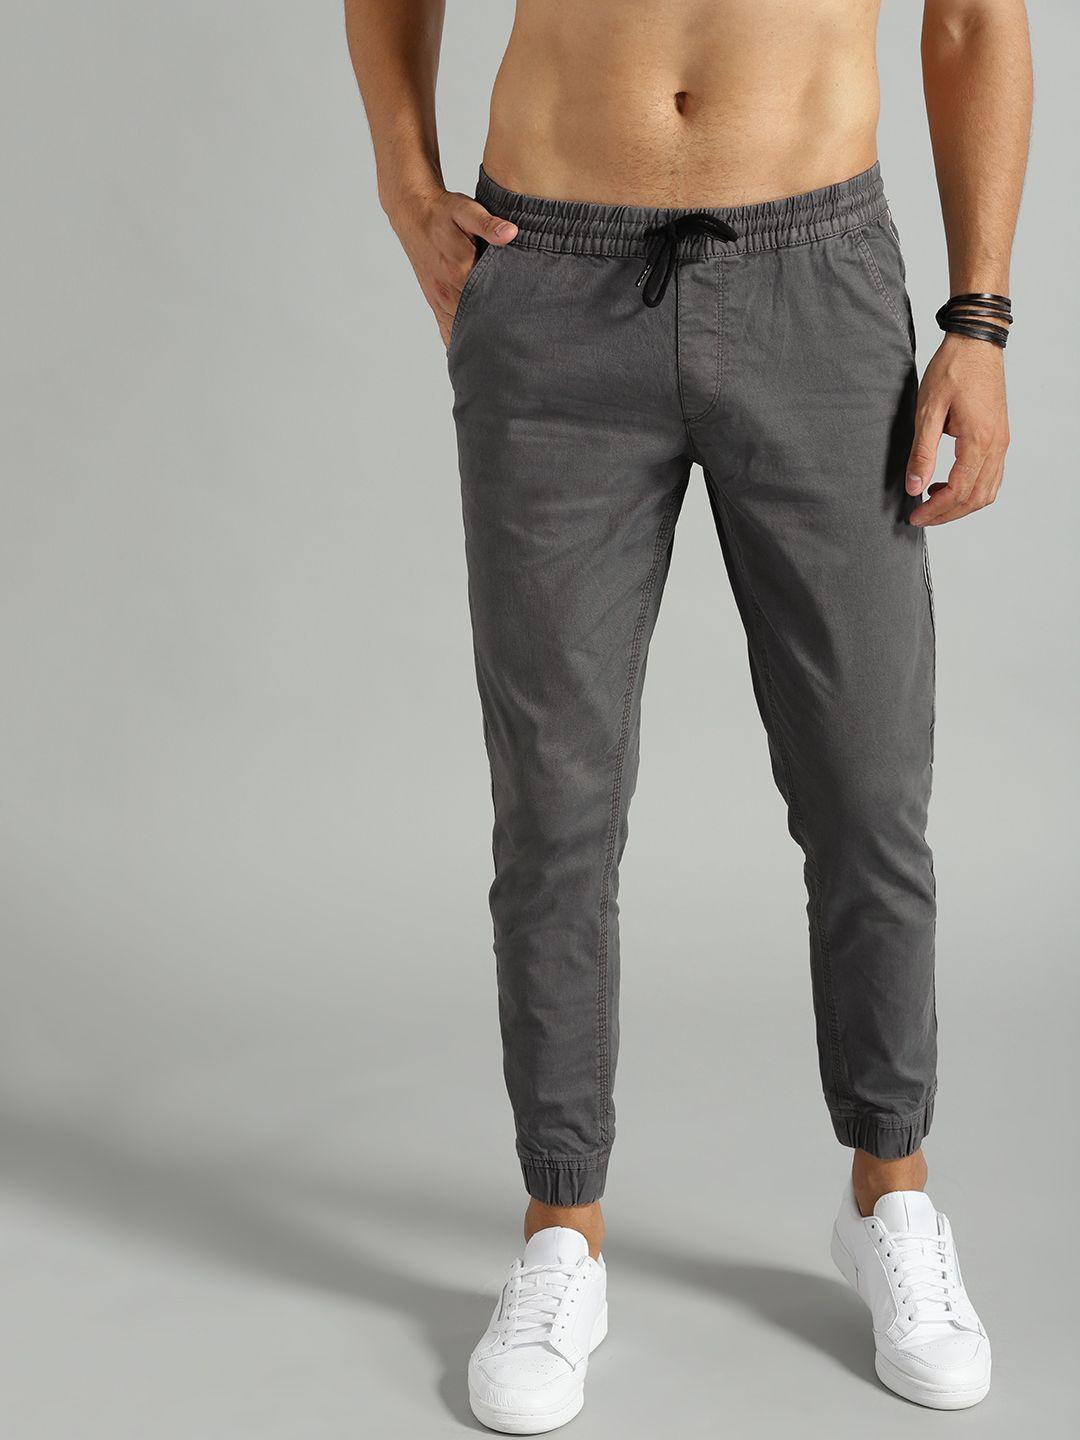 the roadster lifestyle co men charcoal grey slim fit solid joggers